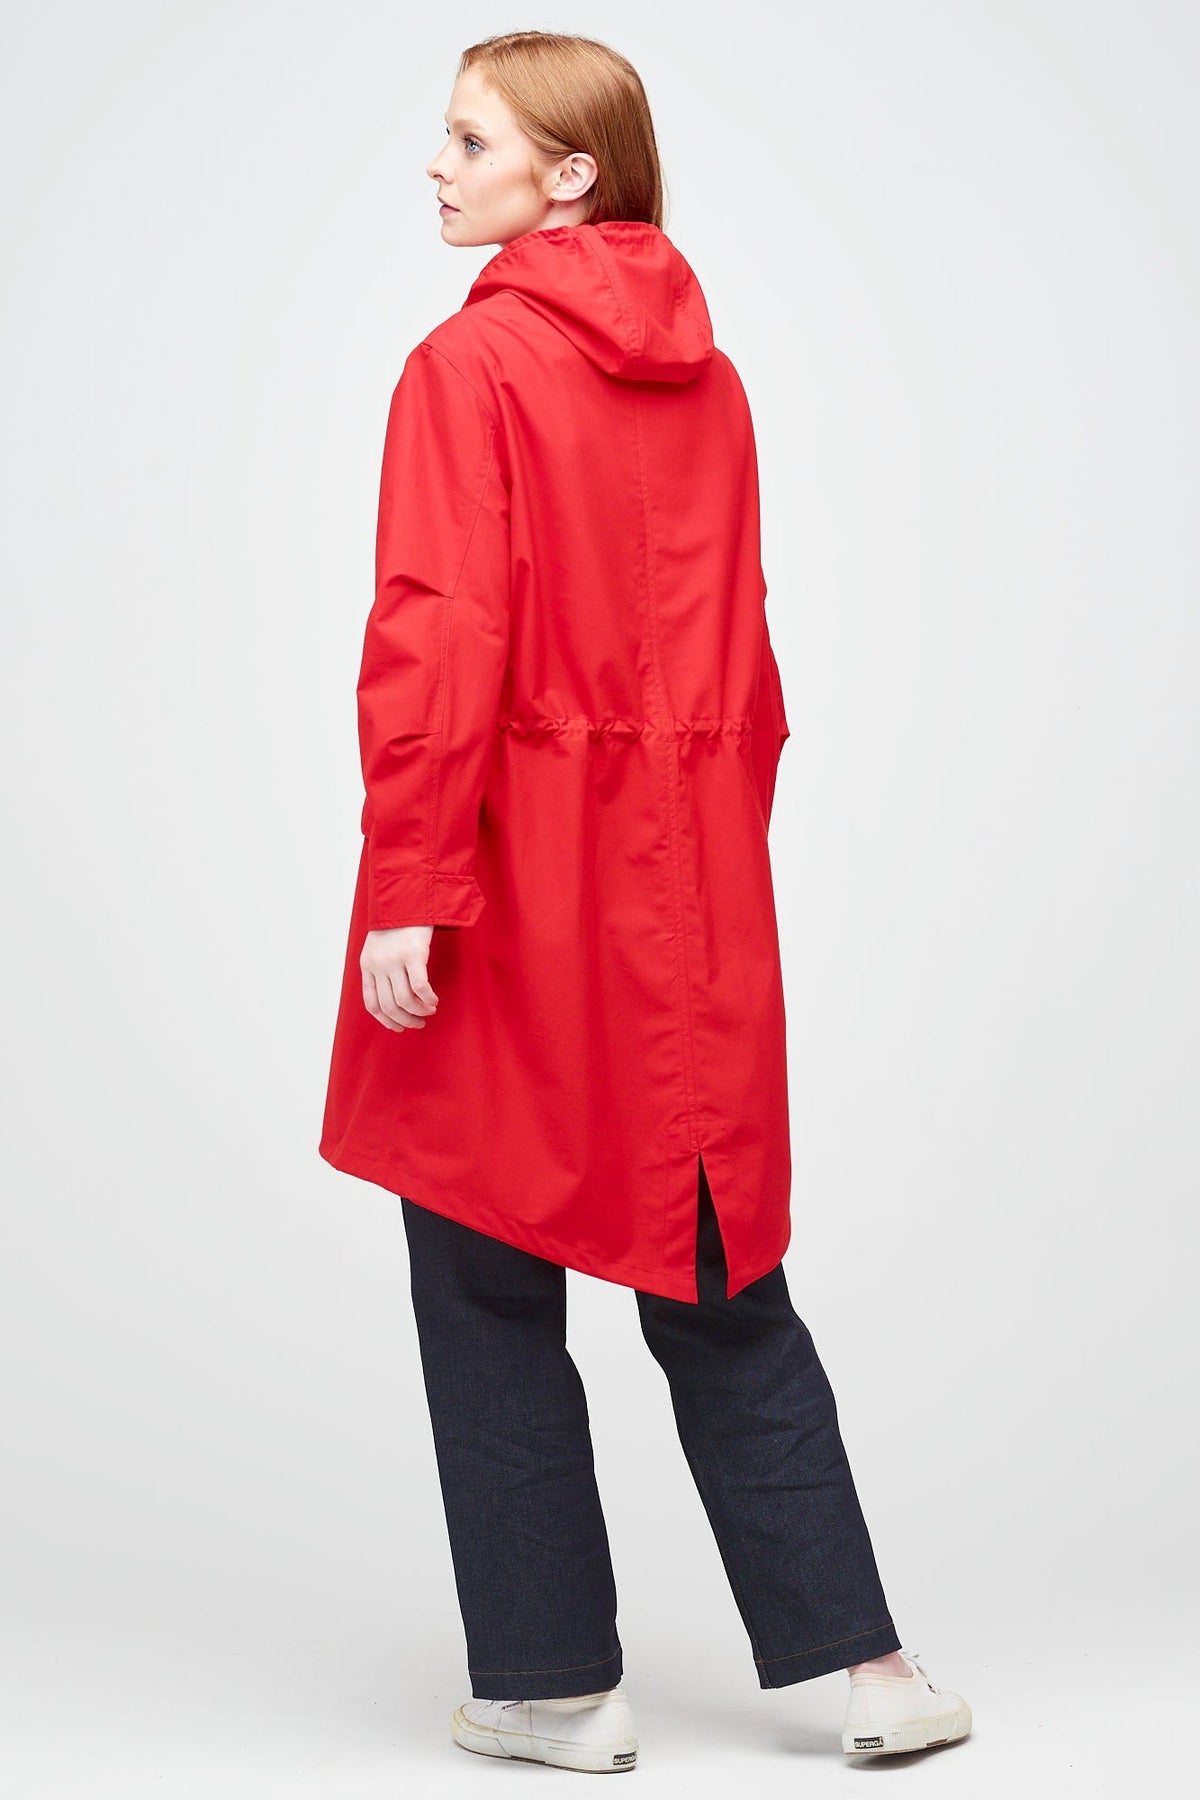 
            rear shot of A young, white female model with ginger hair wearing long red parka. The parka is styled with indigo jeans and a white trainer.